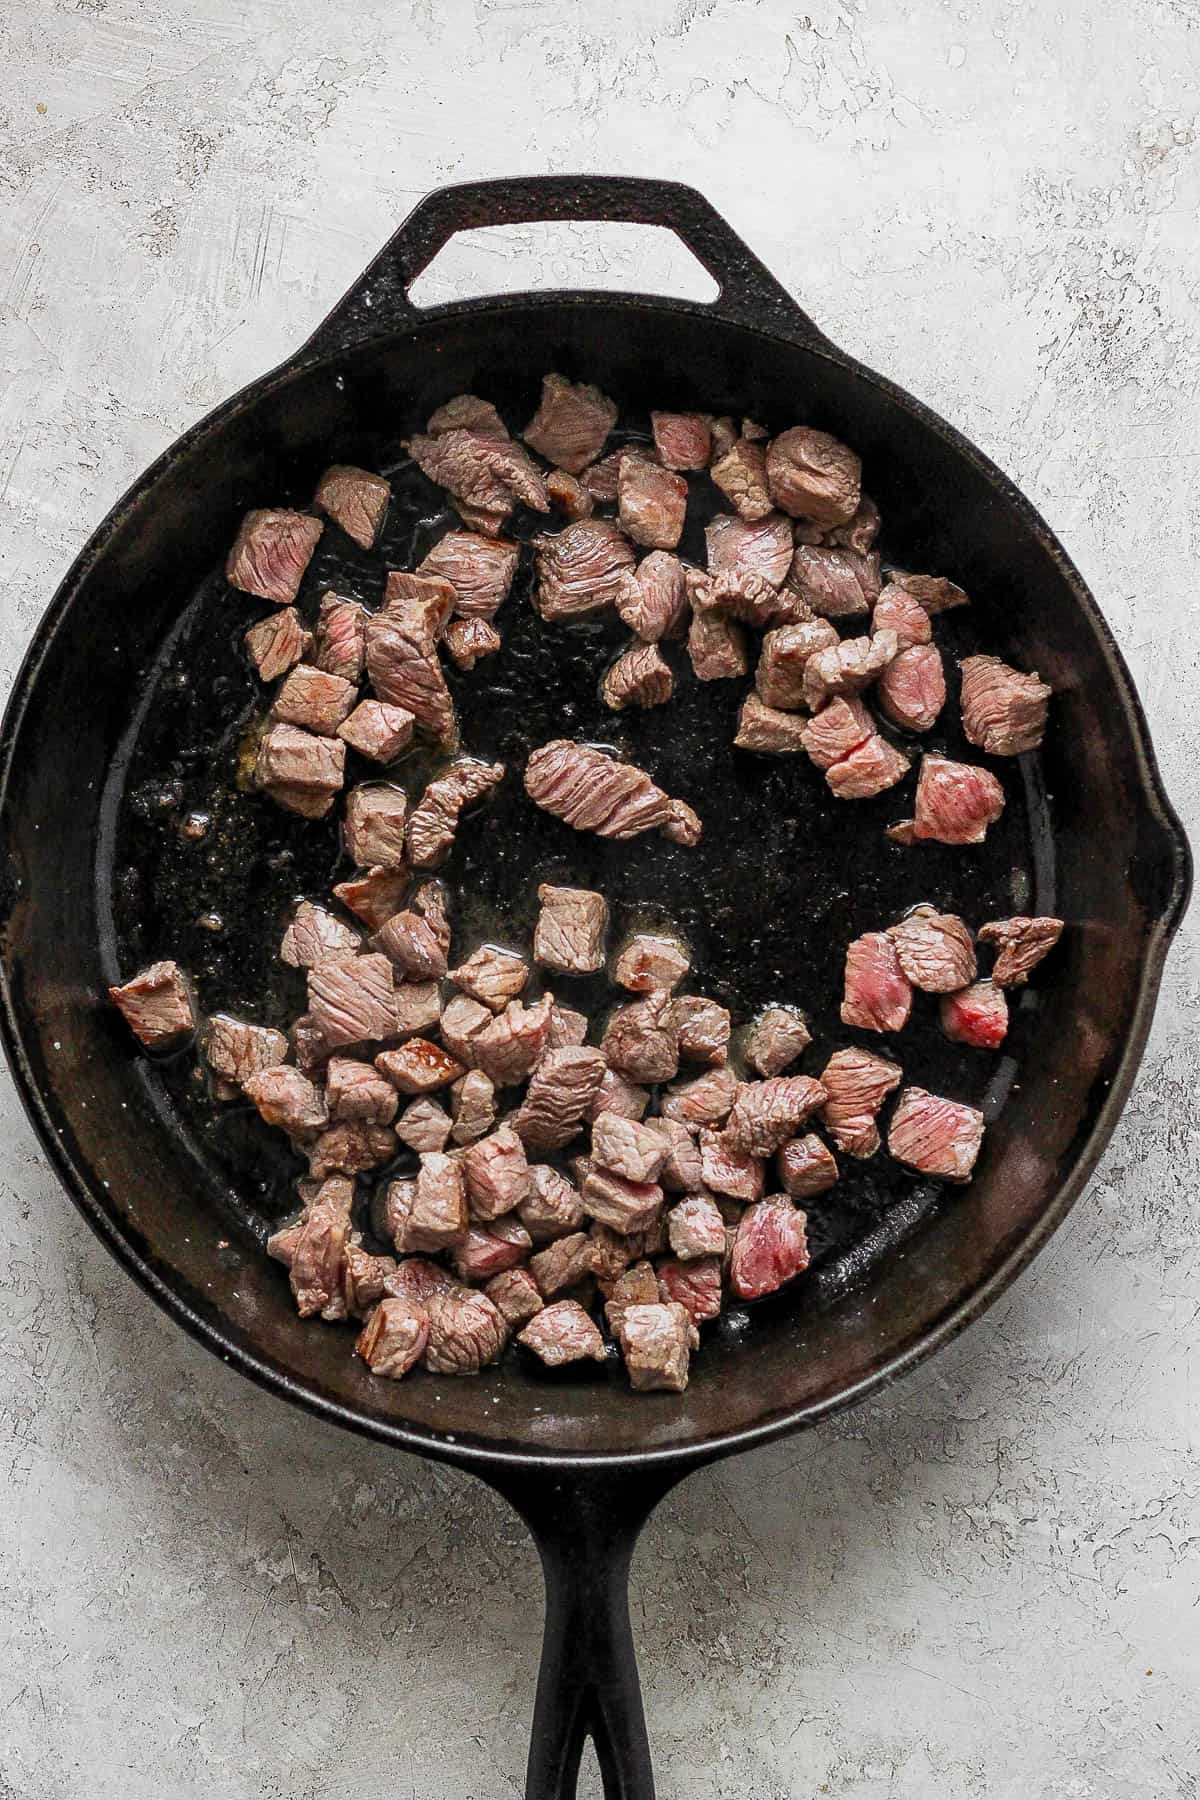 Cubed beef in a cast iron skillet getting seared on each side.